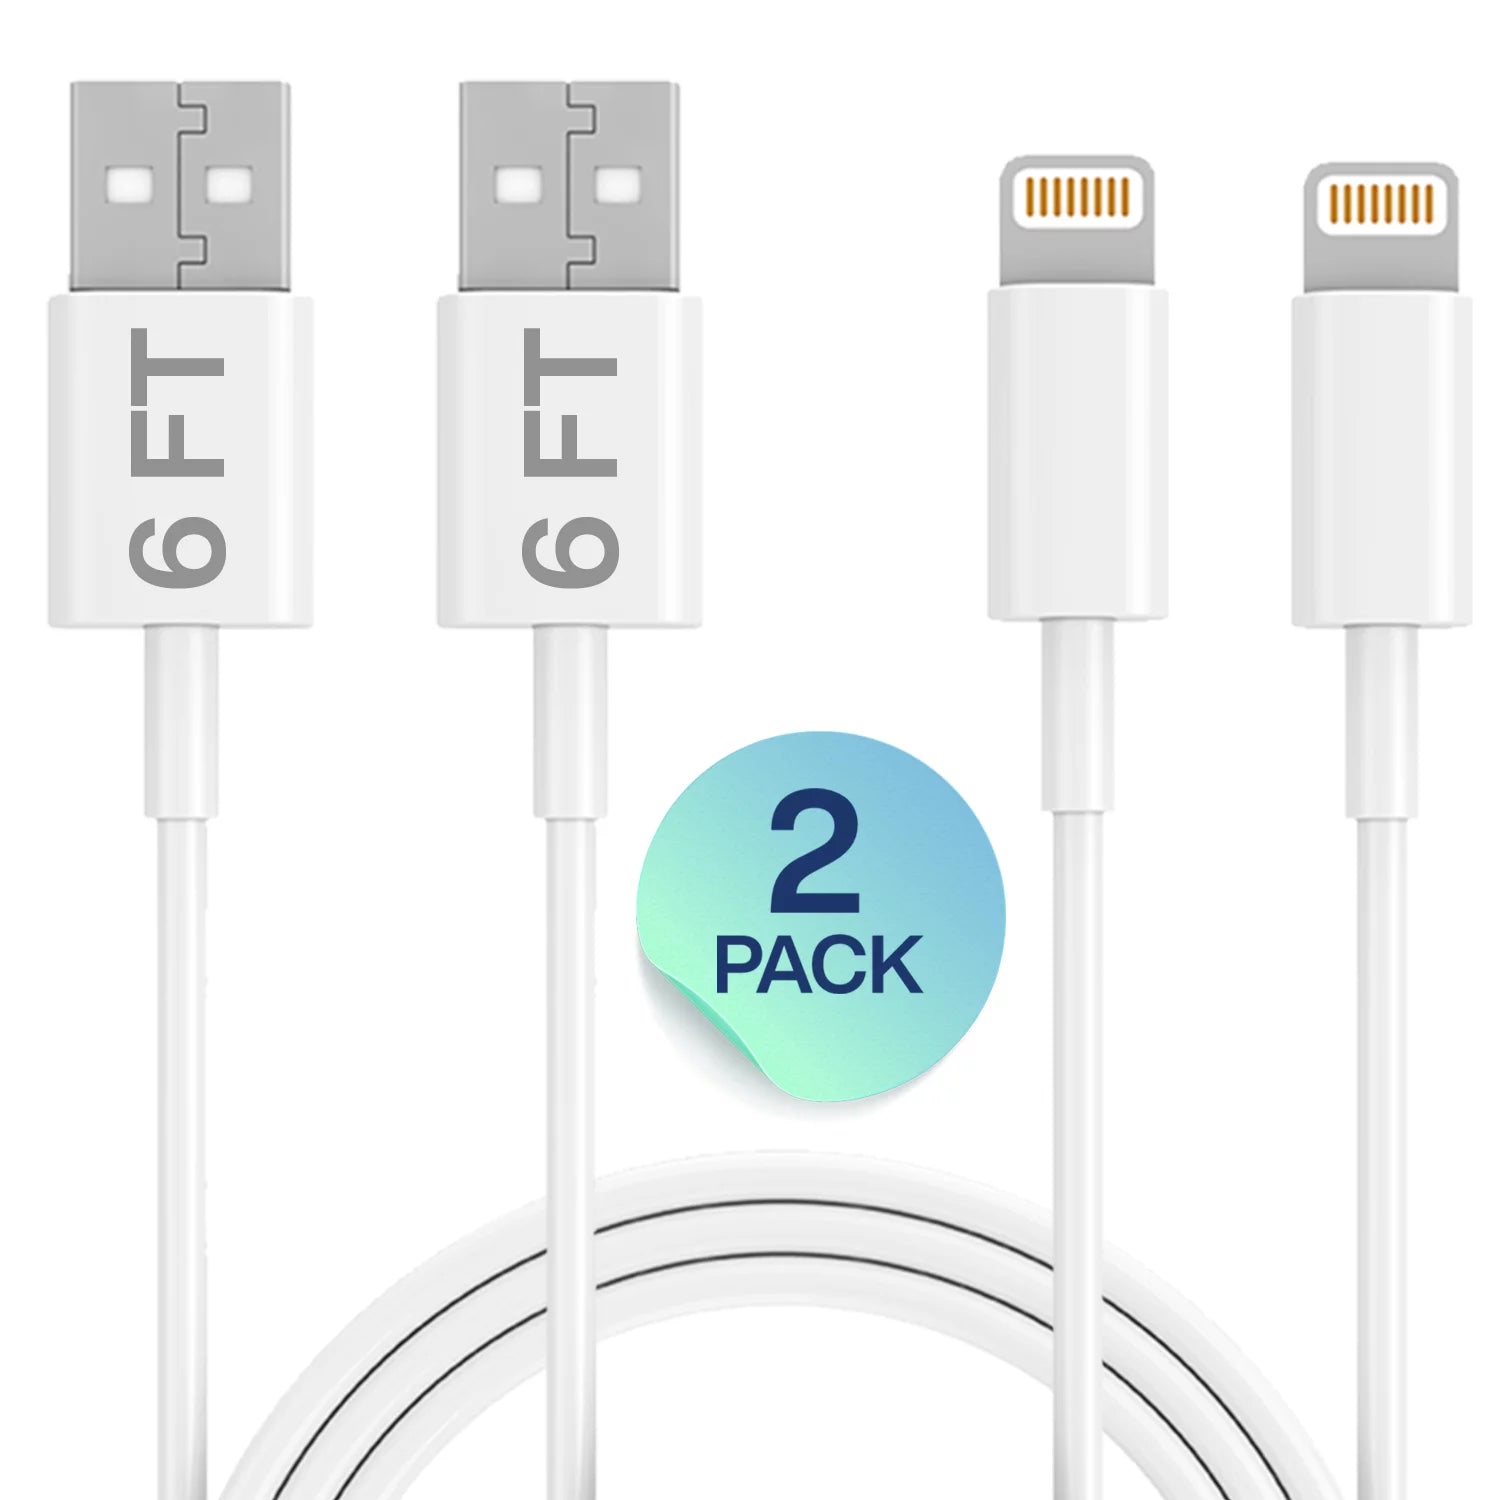 iPhone Charging Cable Infinte Power, 2 Pack 6FT USB Cable, Compatible with iPhone 13/12/11 Xs, Xs Max, XR, X, 8, 7, 6S,iPad Air, Mini, iPod Touch, Case, Fast Charging & Syncing Cord